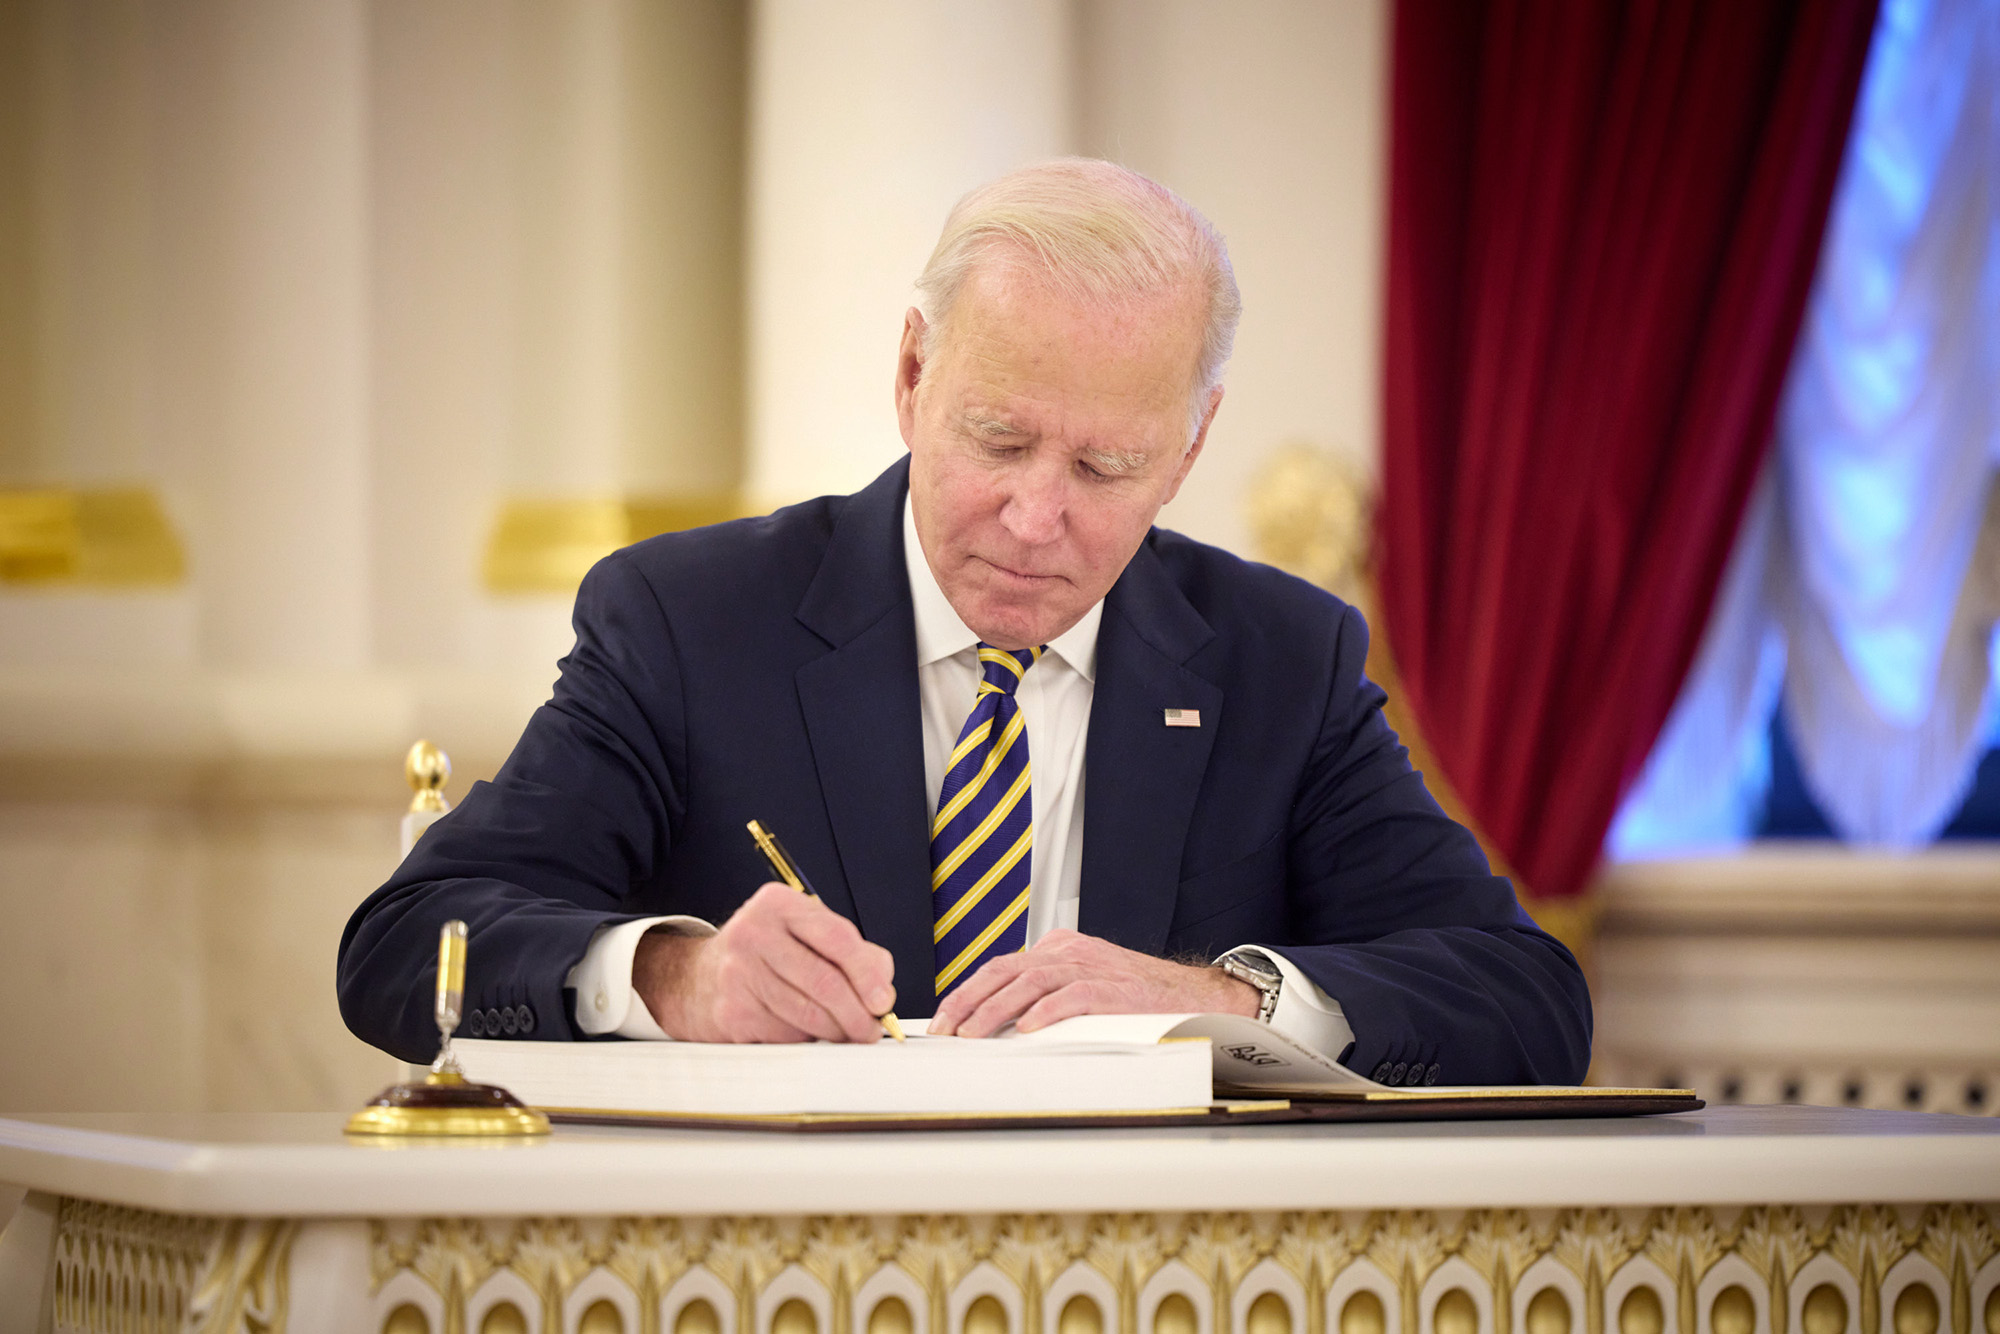 U.S. President Joe Biden signs the guest book during a meeting with Ukrainian President Volodymyr Zelensky at the Ukrainian presidential palace on February 20, in Kyiv, Ukraine. 